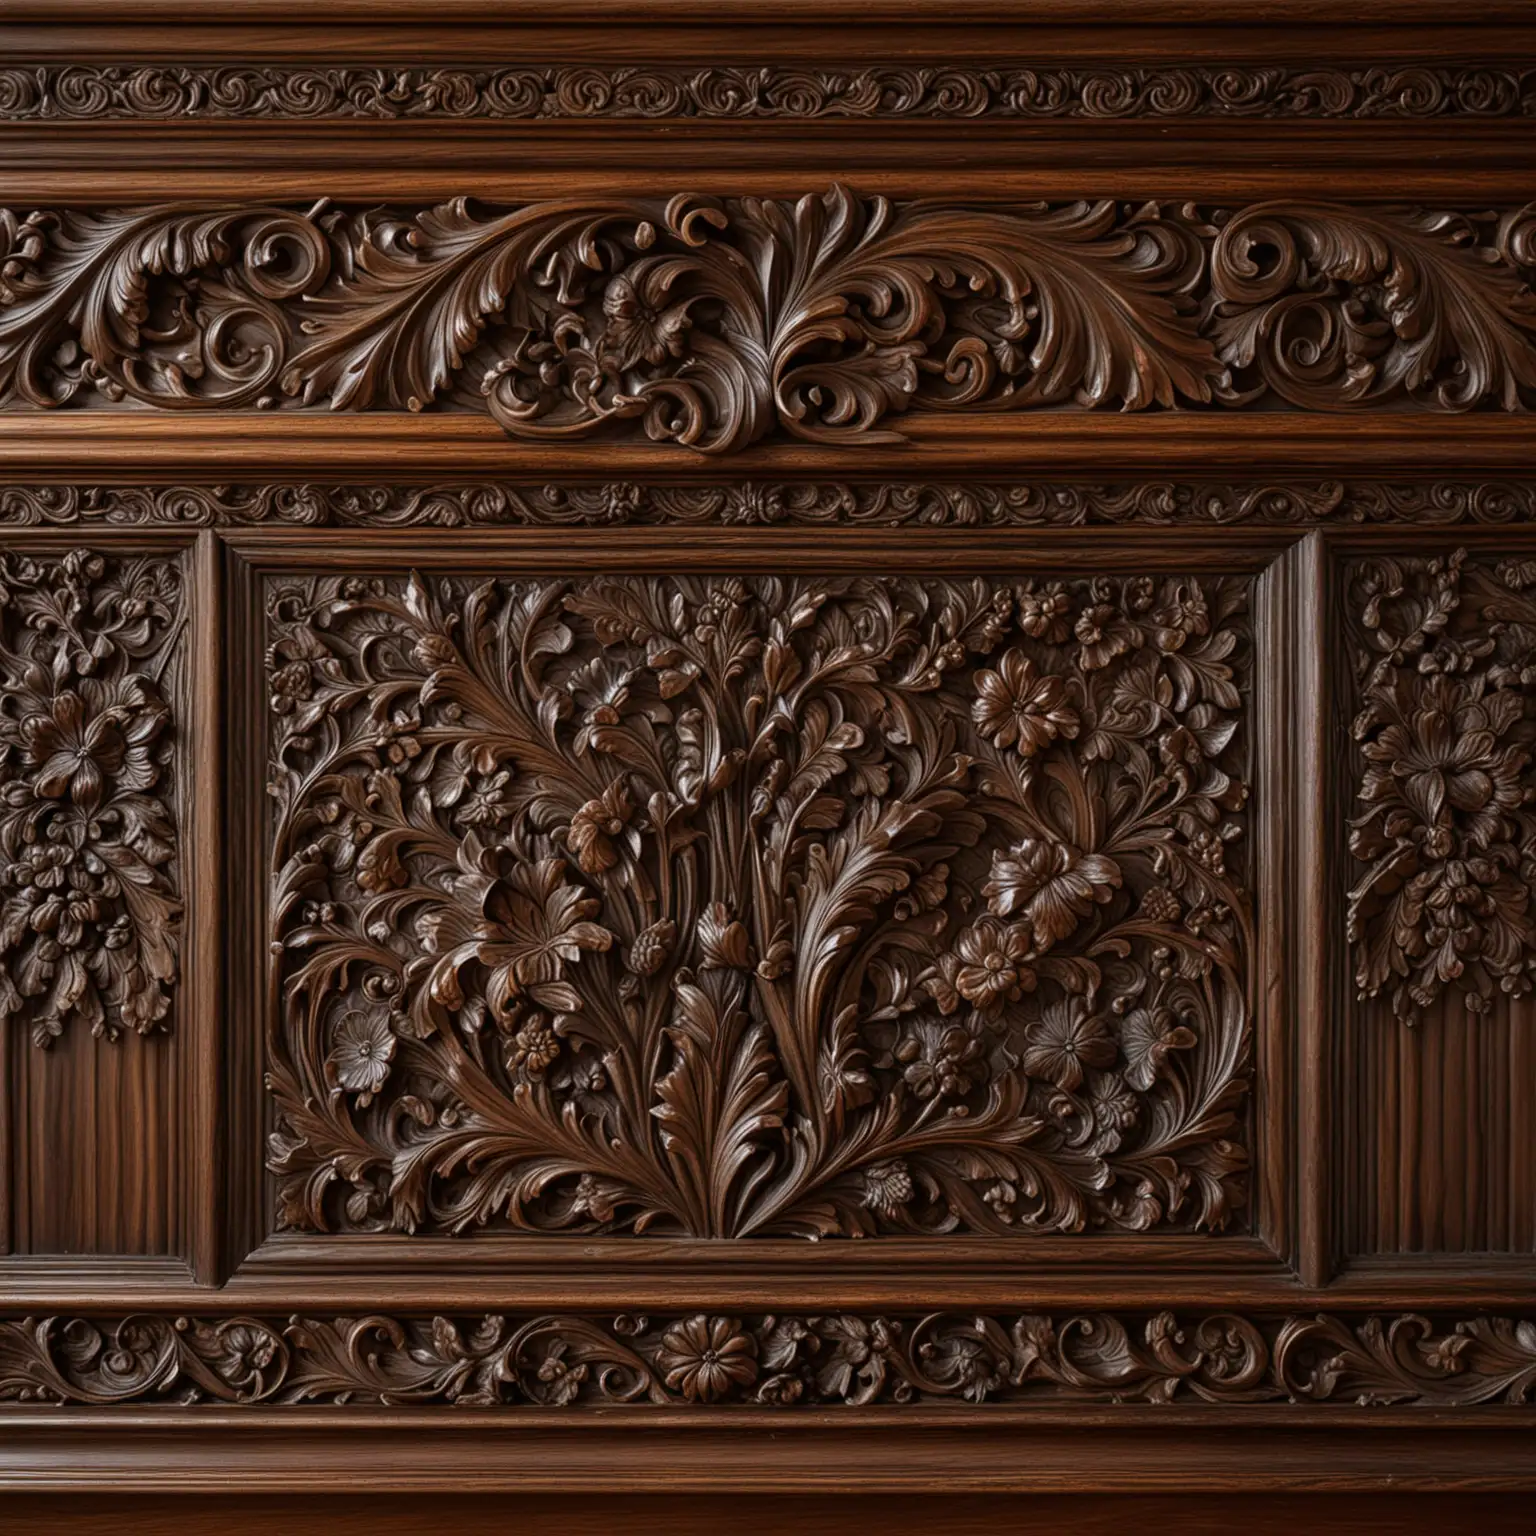 FINELY CARVED DARK WOOD WAINSCOTTING SURROUNDED BY AN INTRICATELY CARVED FRAME IN THE STYLE OF NARNIA